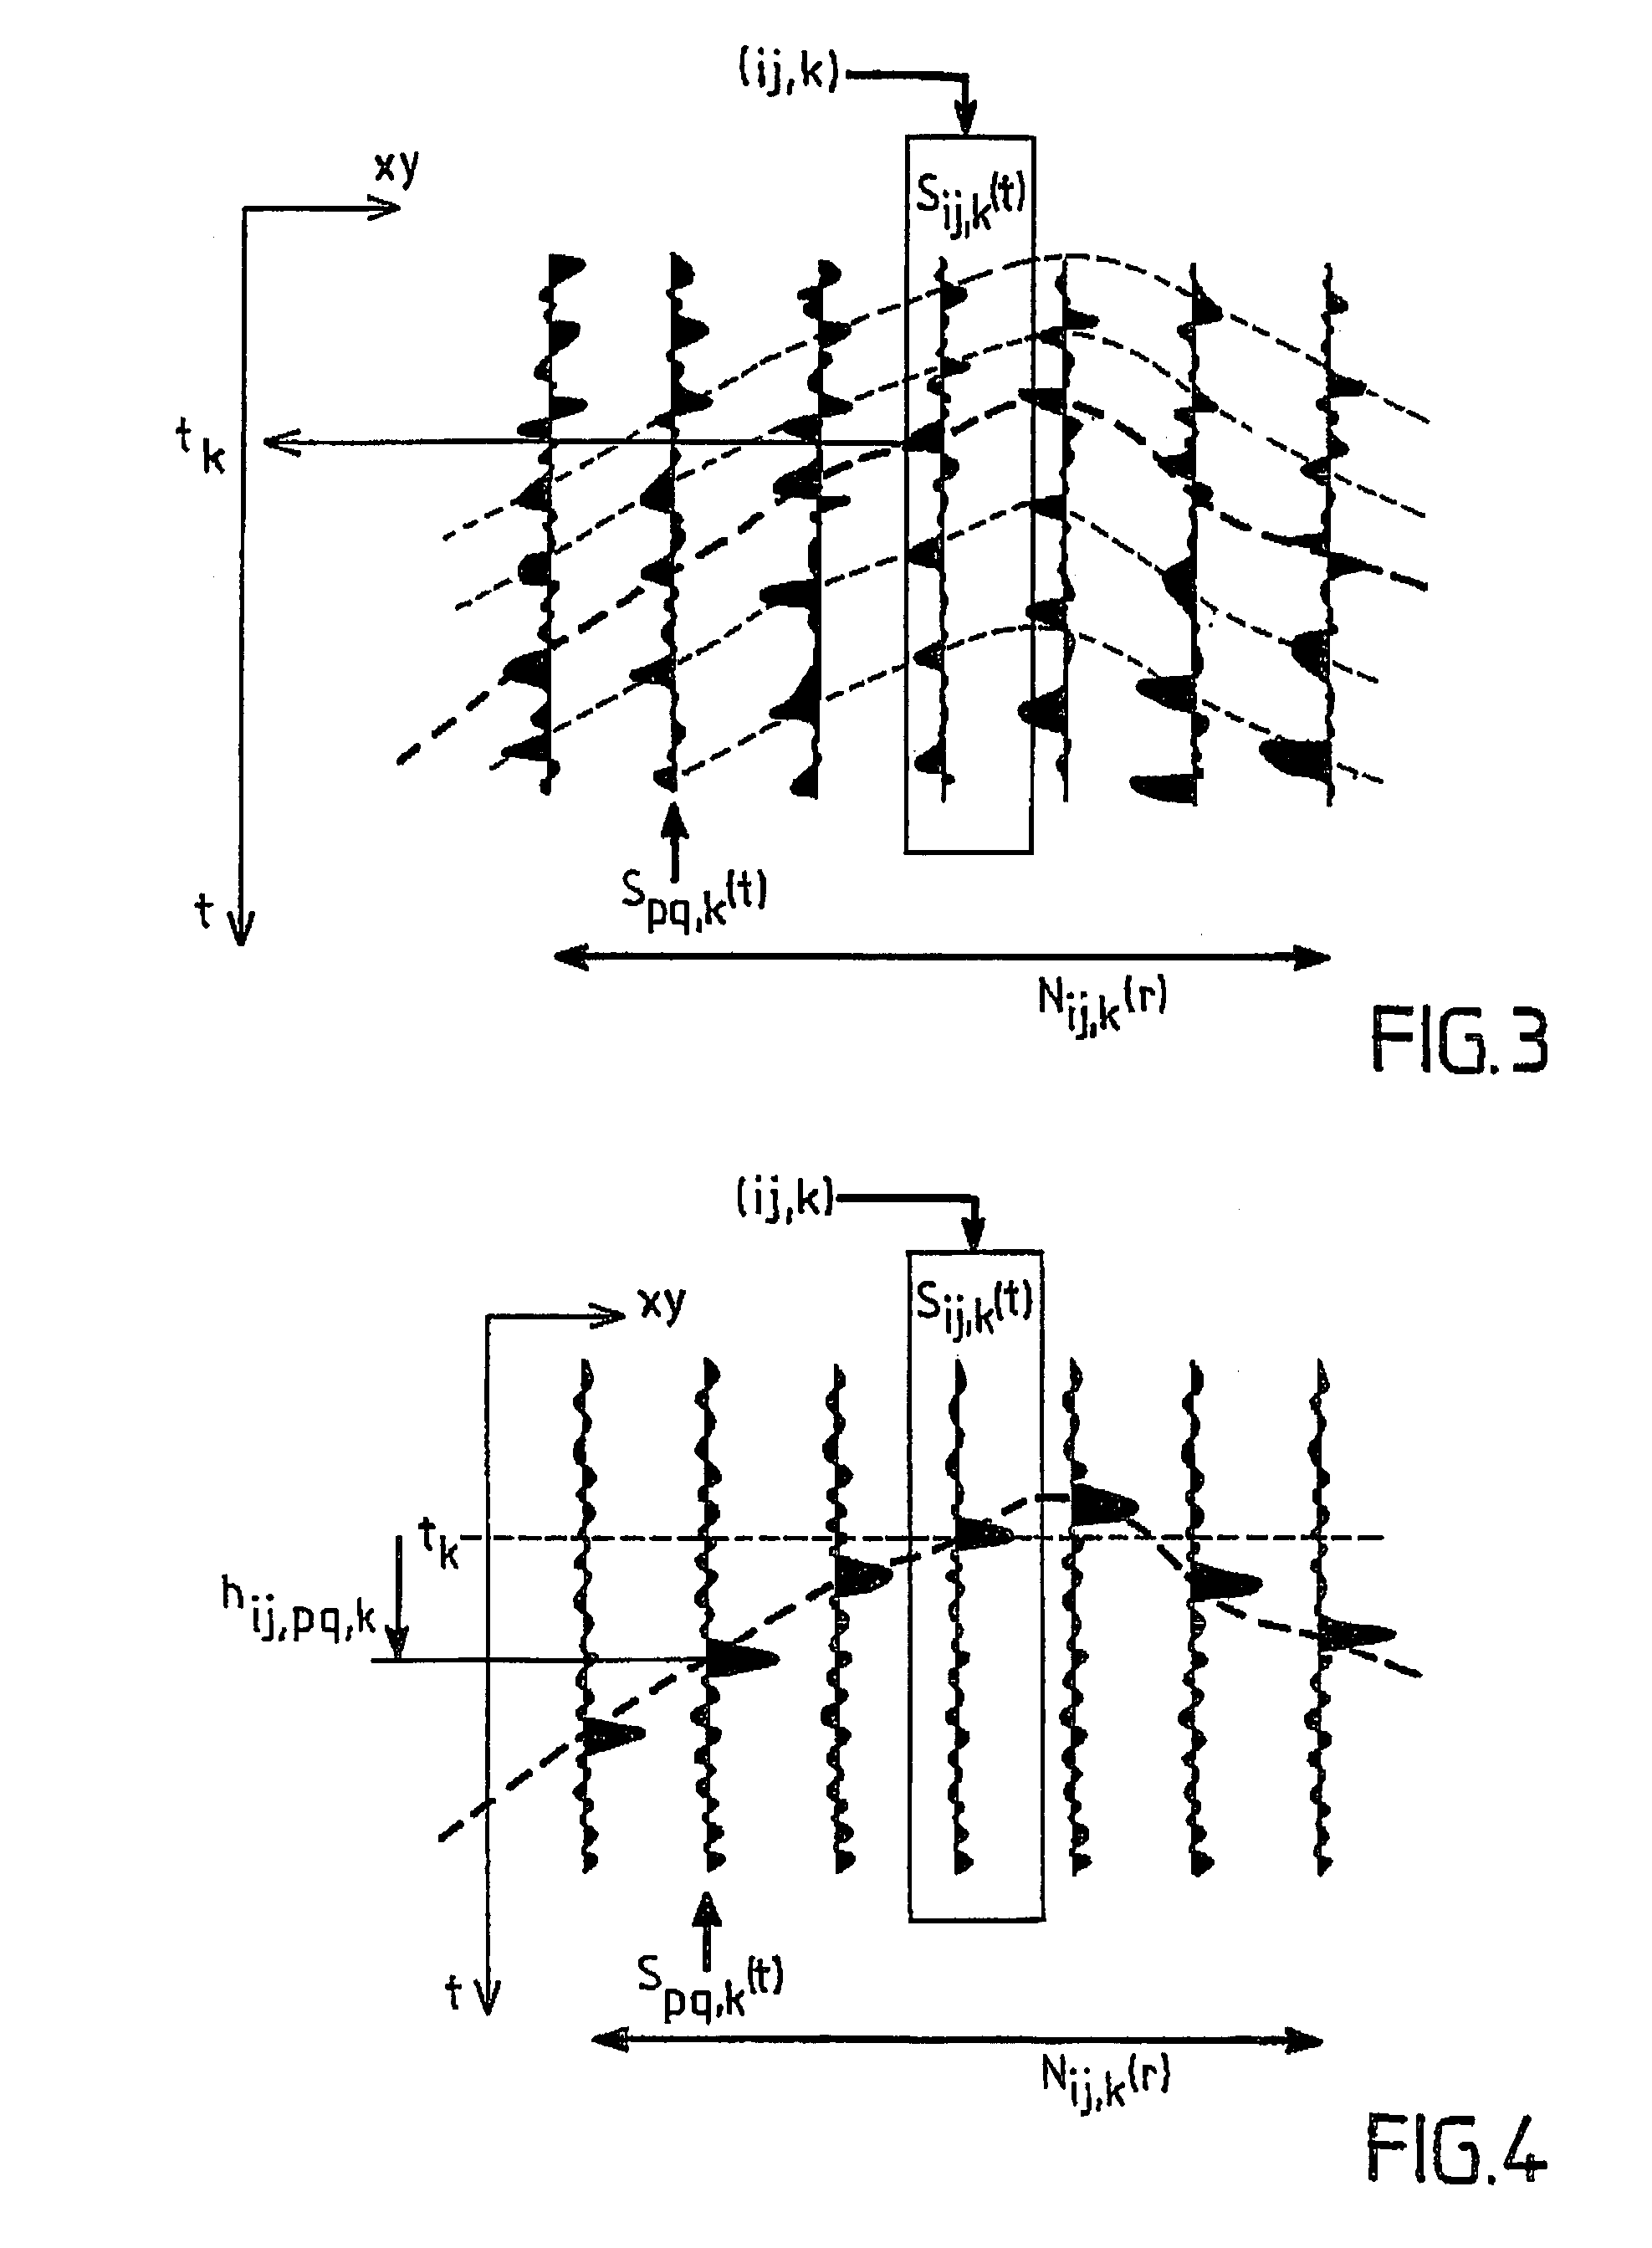 Device and software package for extracting a geological horizon and related properties